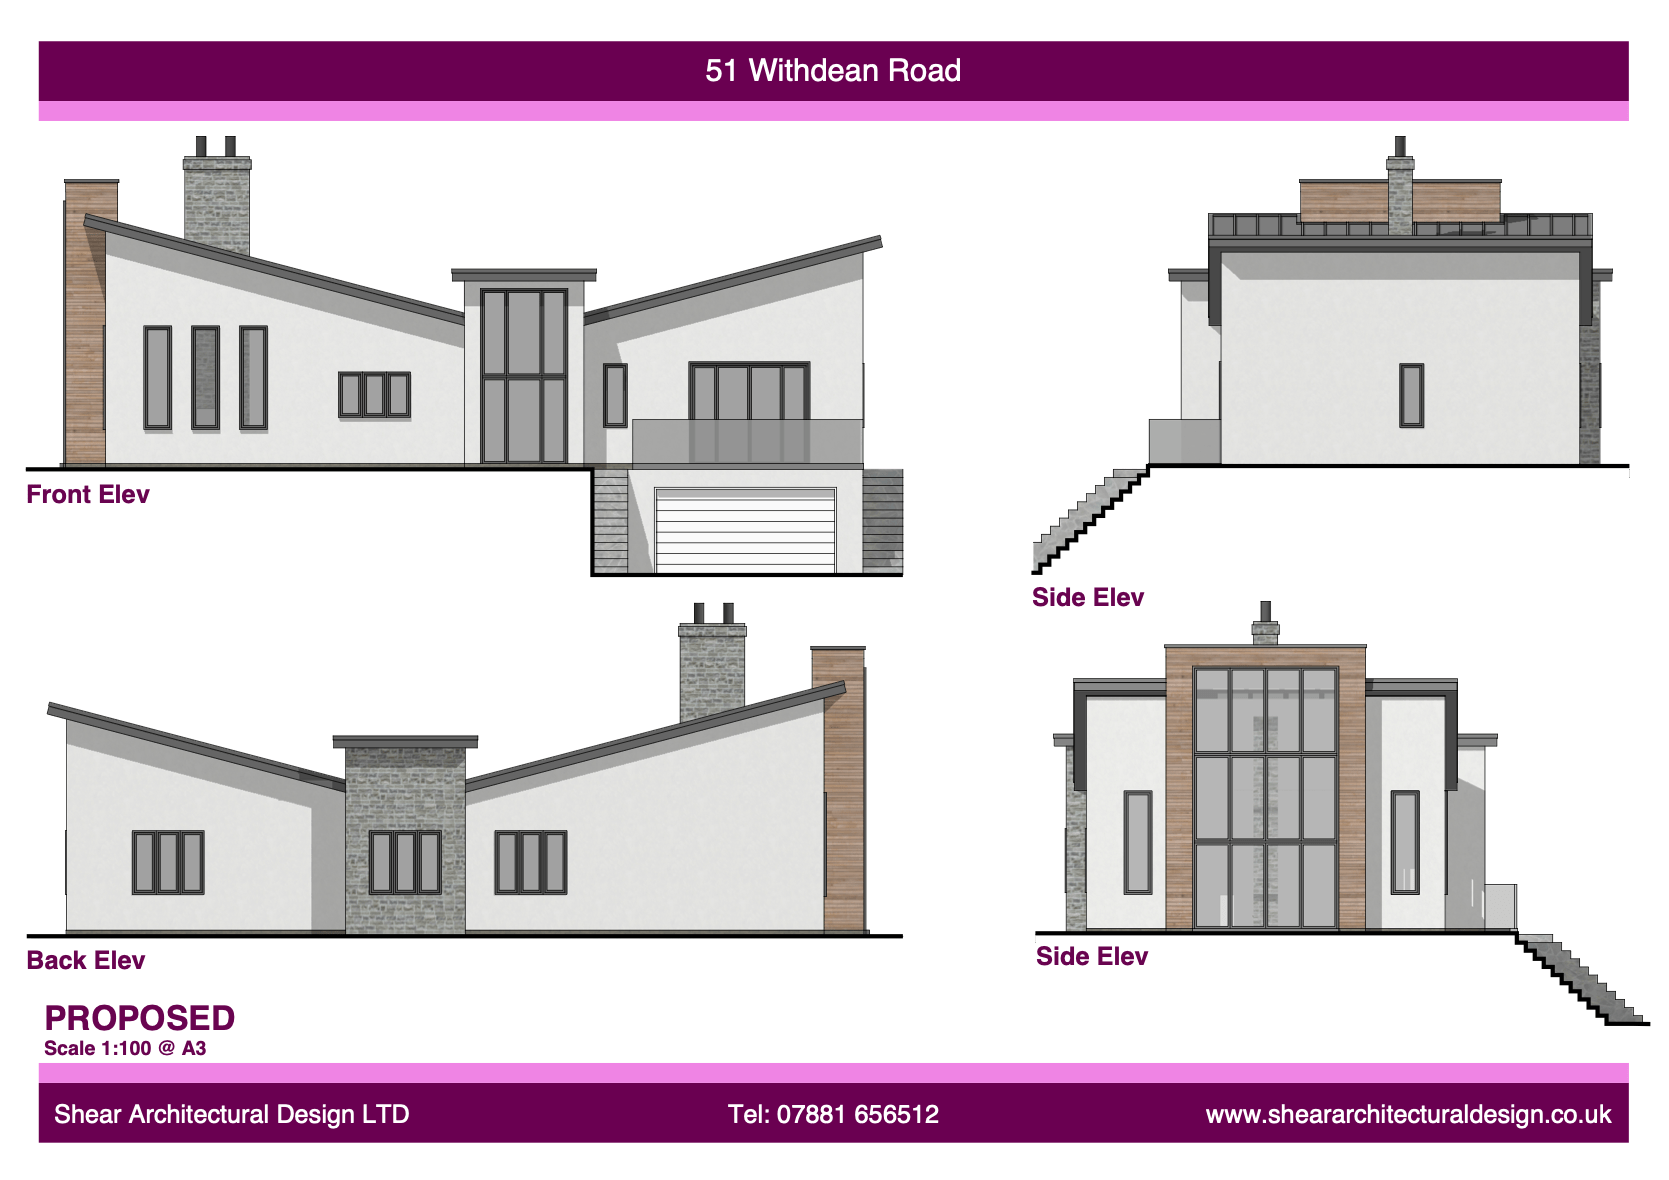 Contemporary new build house with zinc gull-wing roof, vaulted ceilings, and scenic view of Withdean Stadium